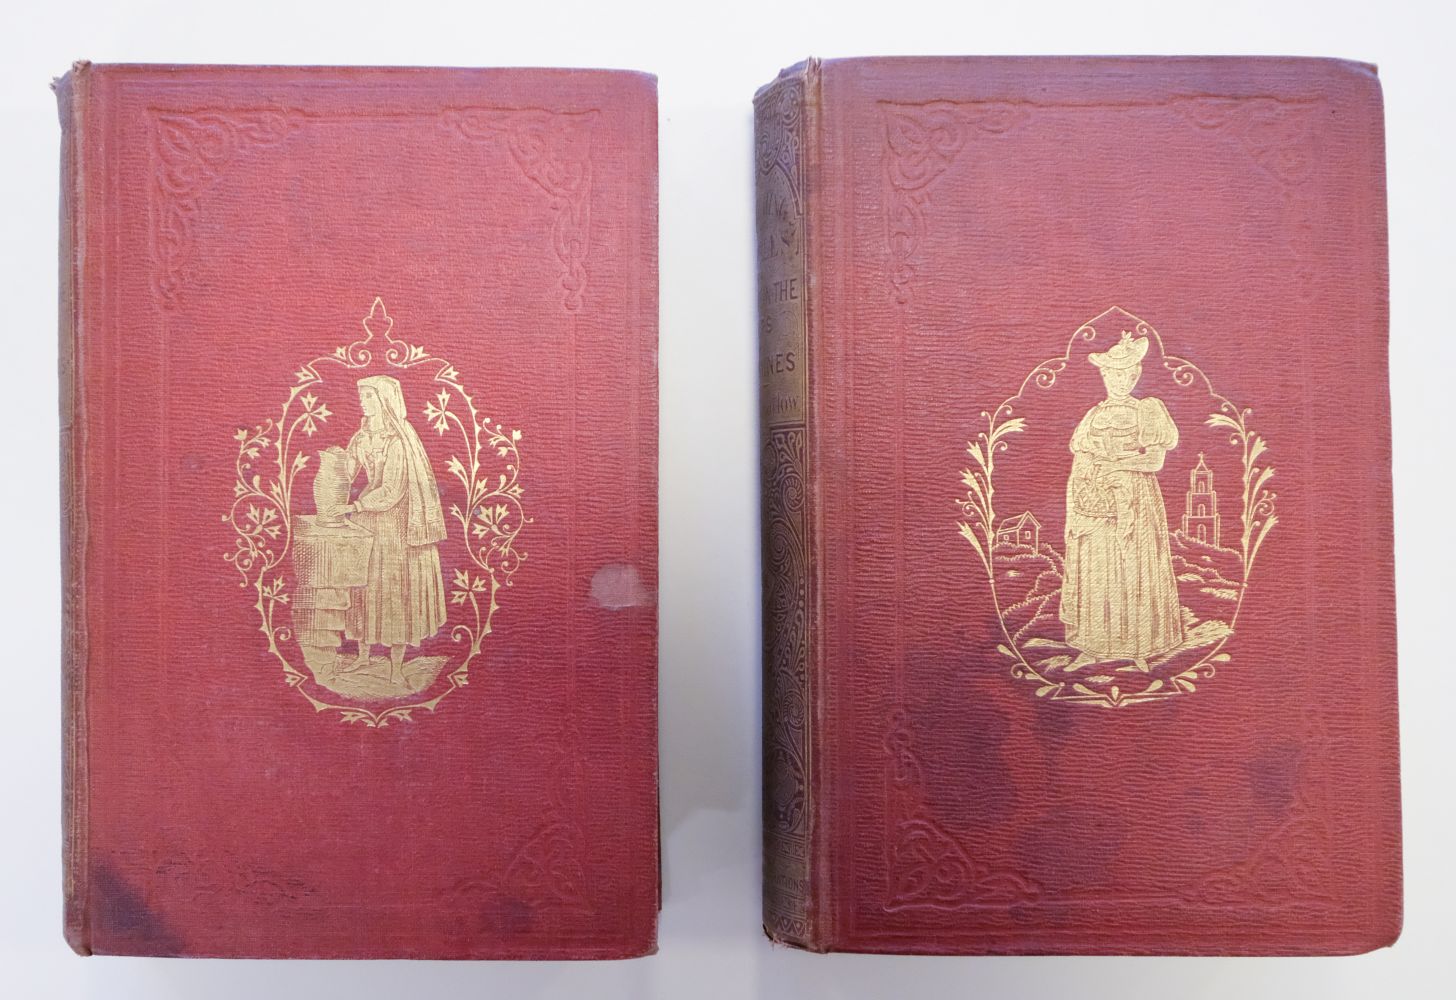 Catlow (Agnes and Maria E.) Sketching Rambles, 2 vols, 1861 - Image 2 of 10